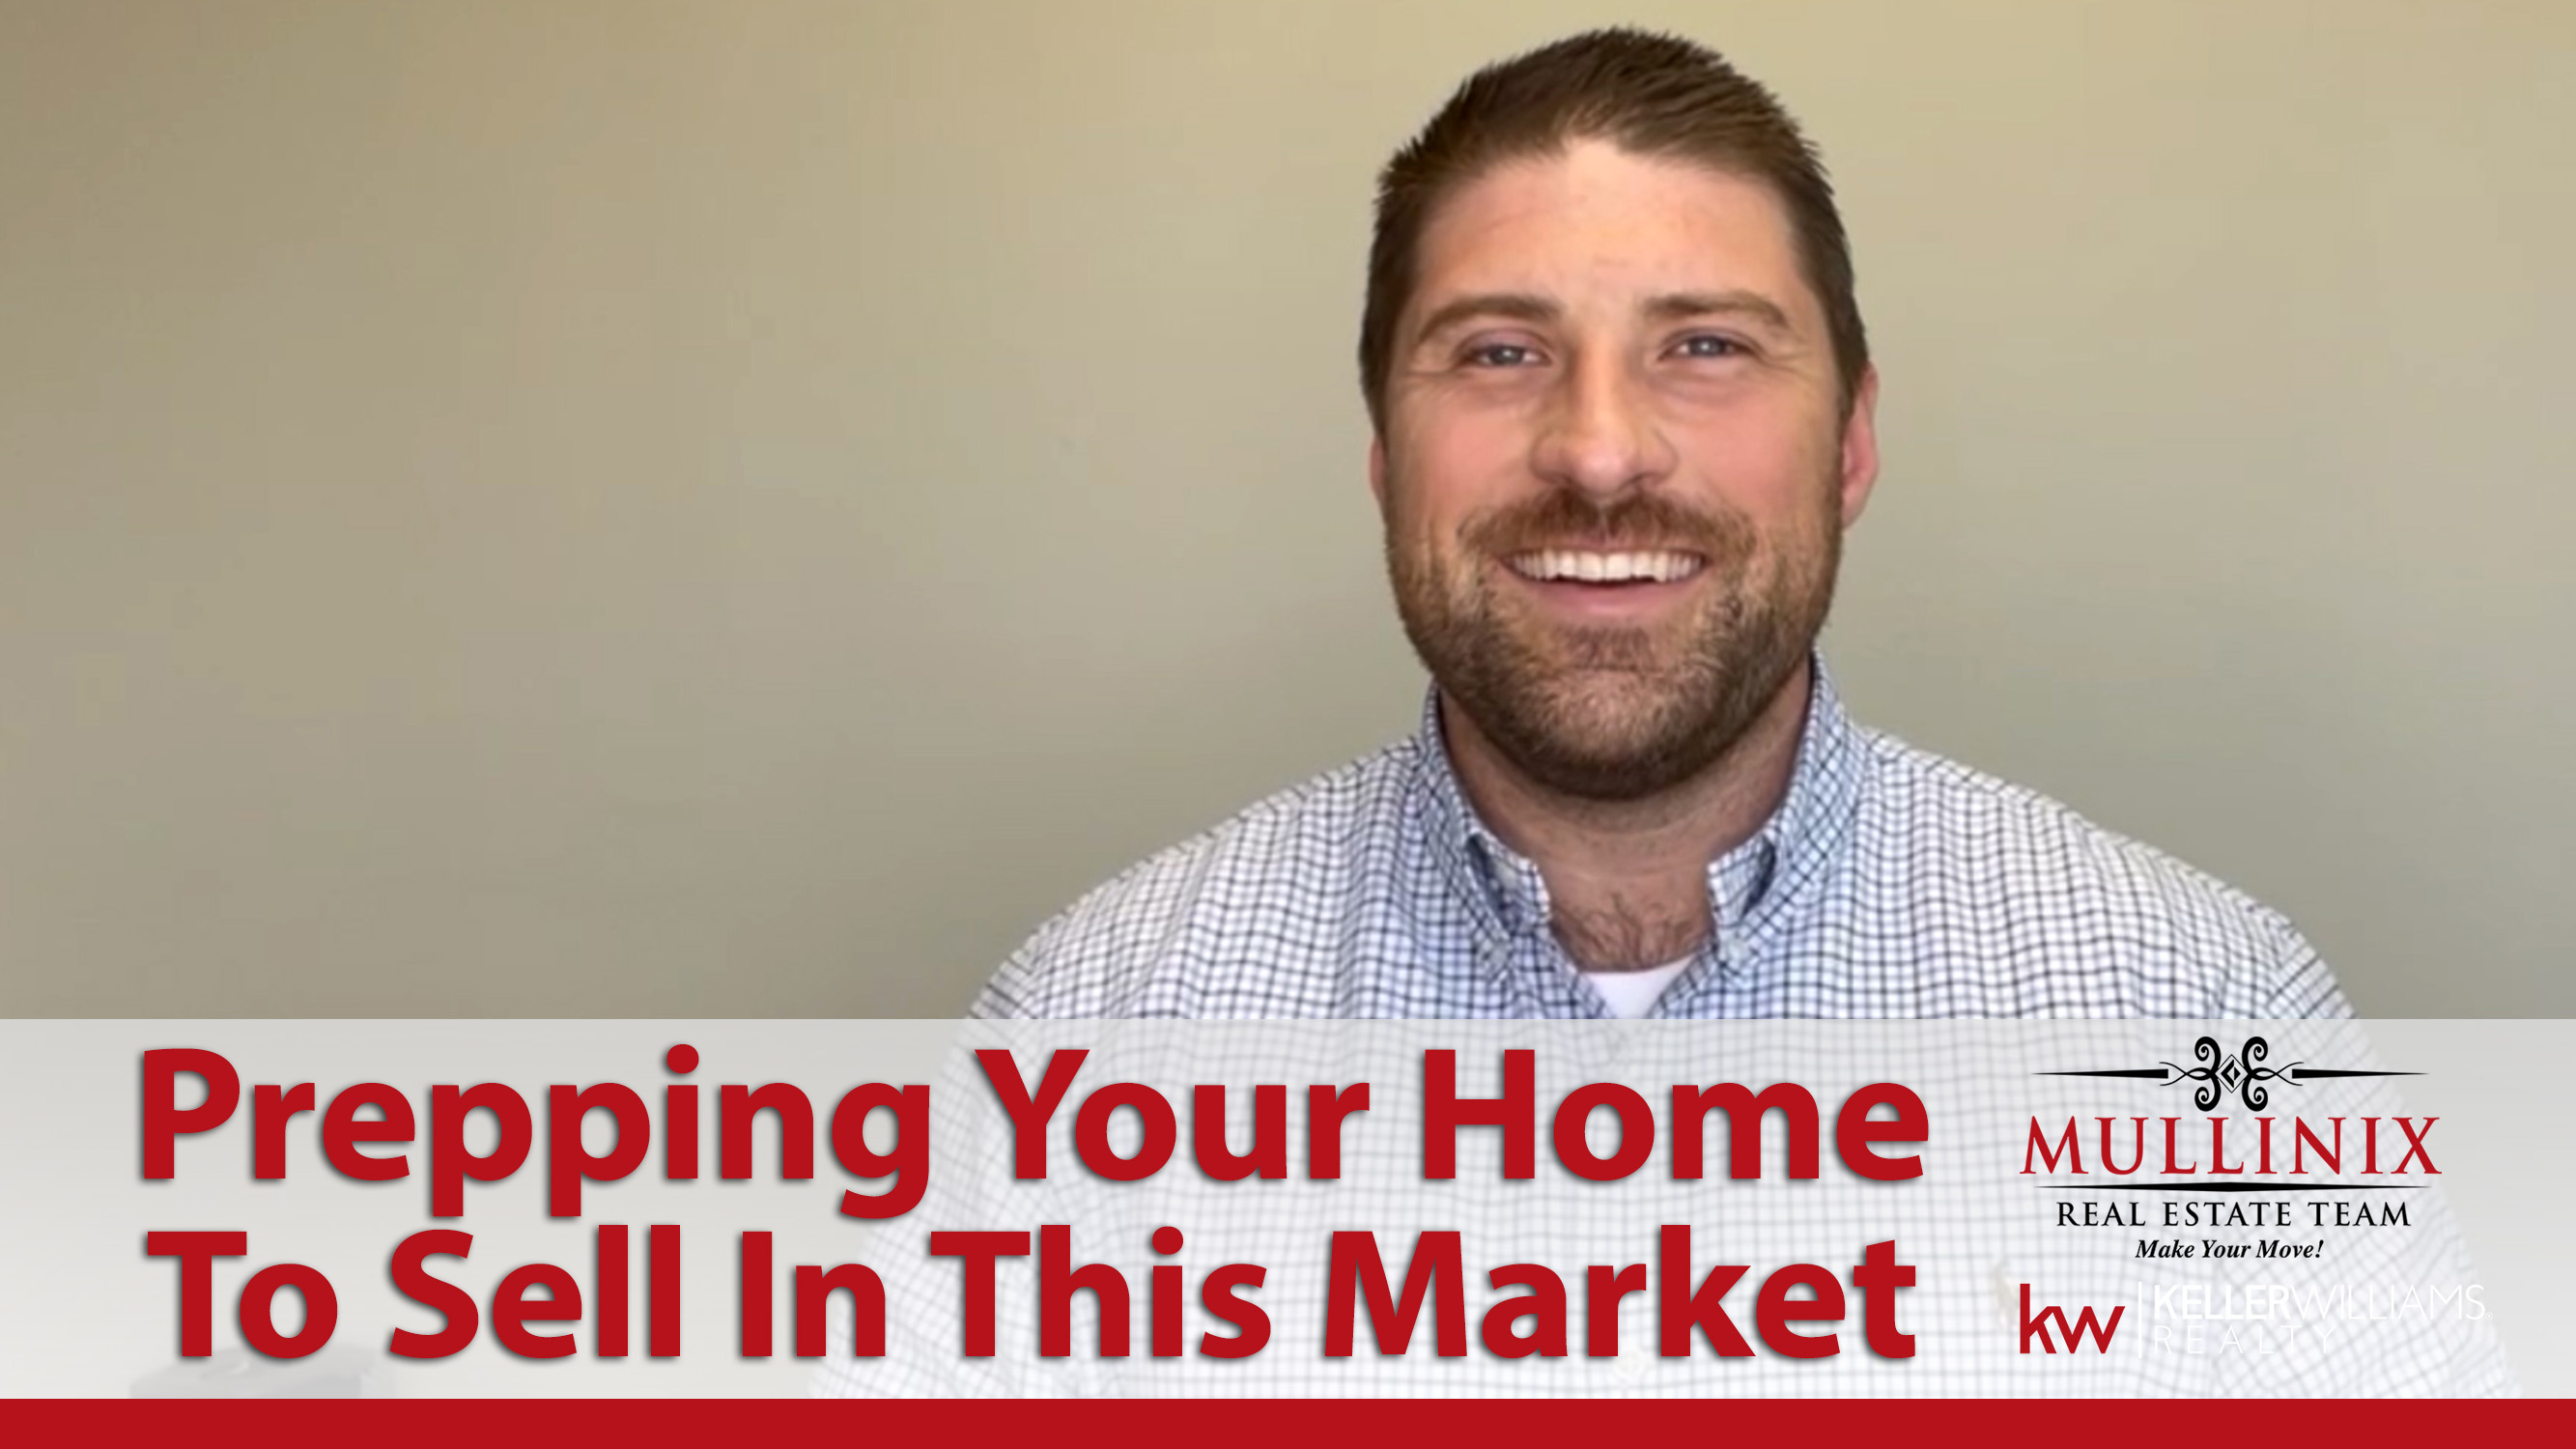 3 Tips for Preparing Your Home for the Market